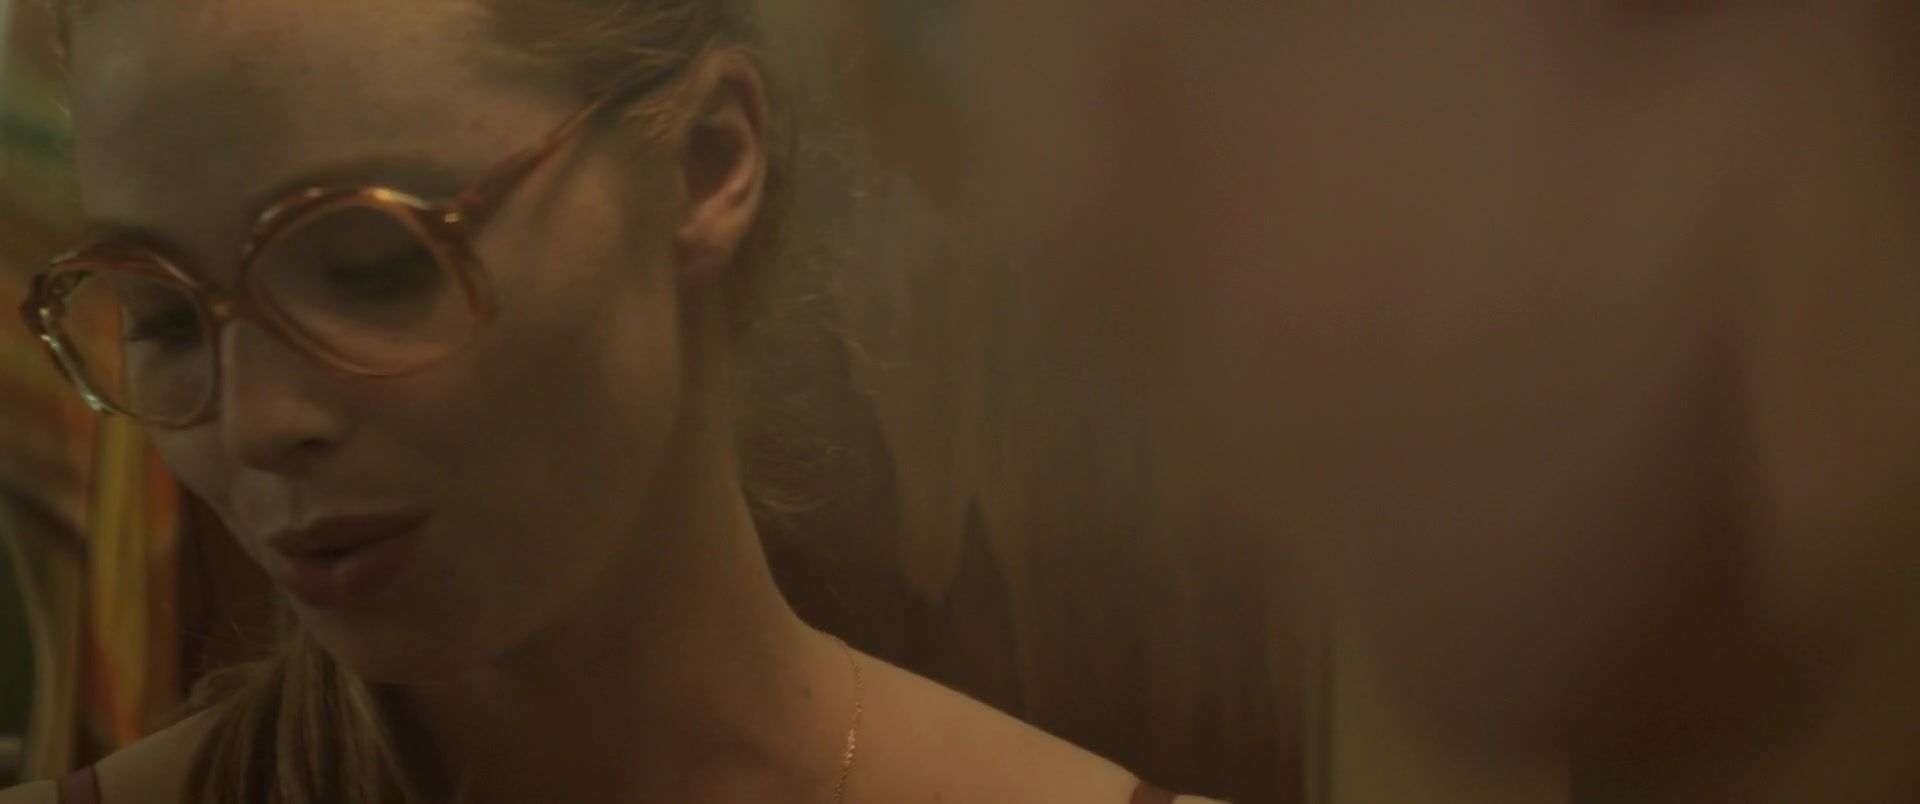 Glory Hole Freya Mavor - The Lady in the Car with Glasses and a Gun (2015) Girl On Girl - 1